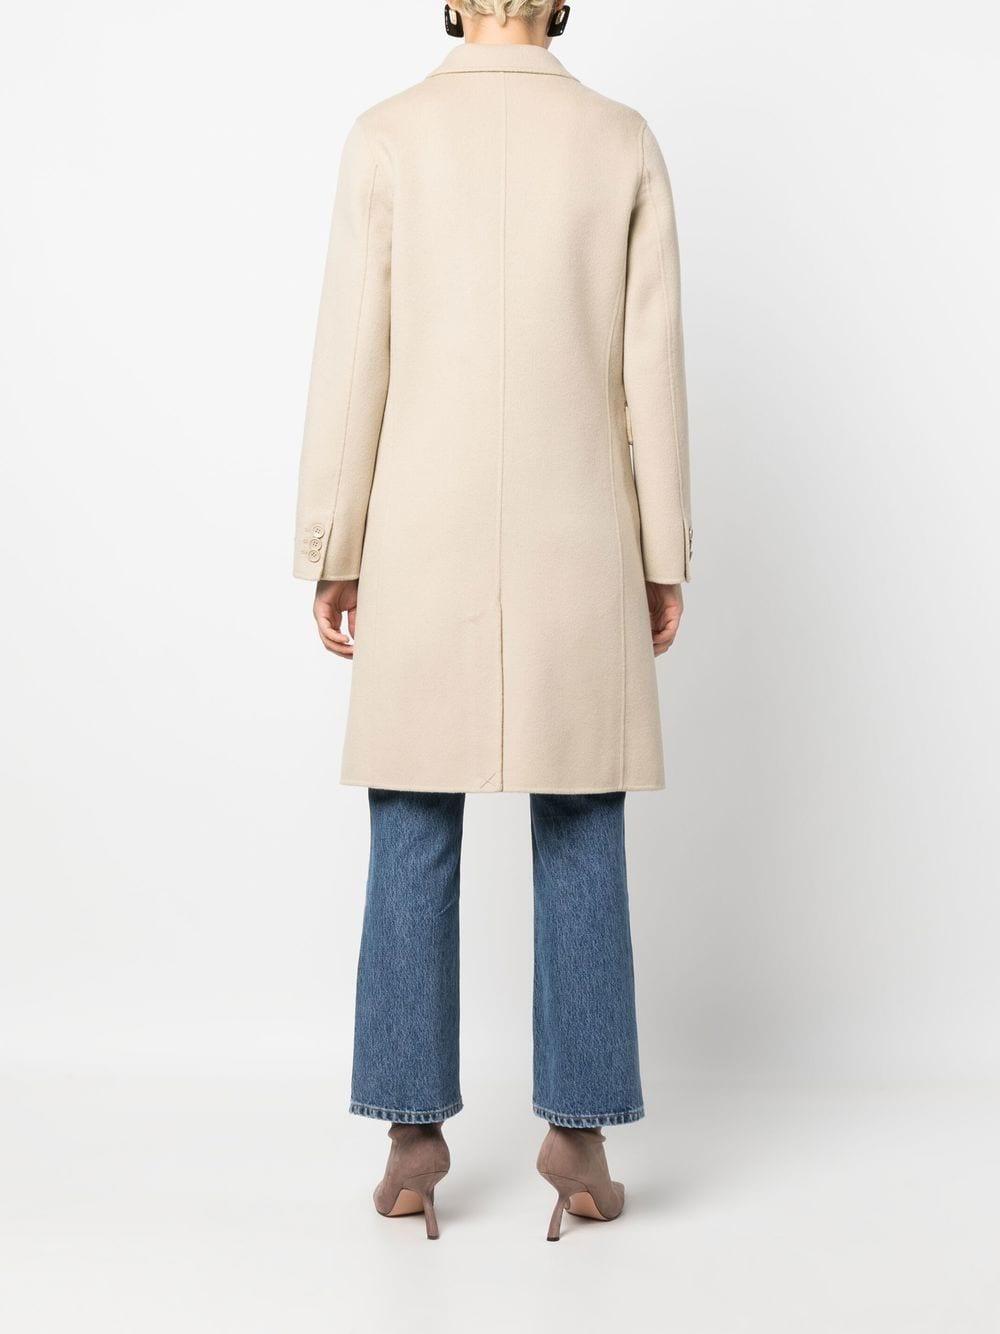 Paltò Double- Breasted Coat in Natural | Lyst